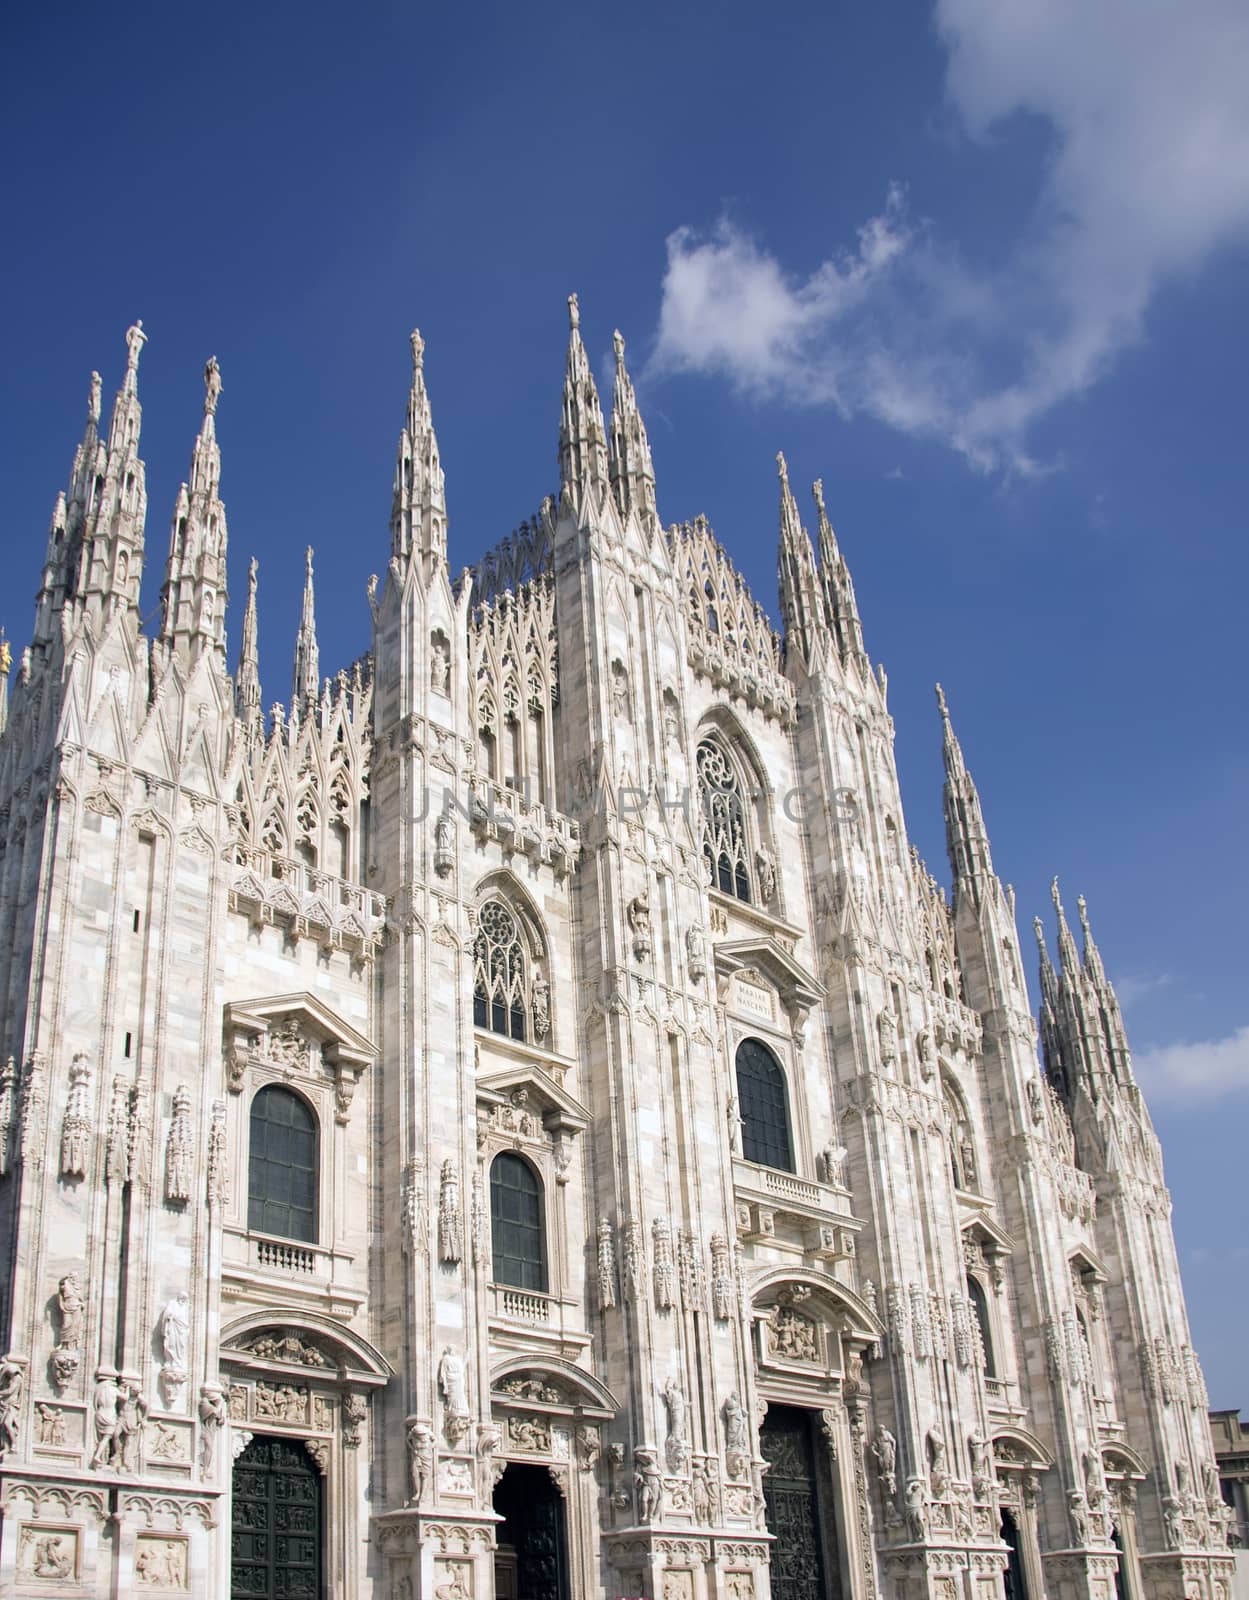 Duomo marble cathedral in Milan, Italy by fotoecho